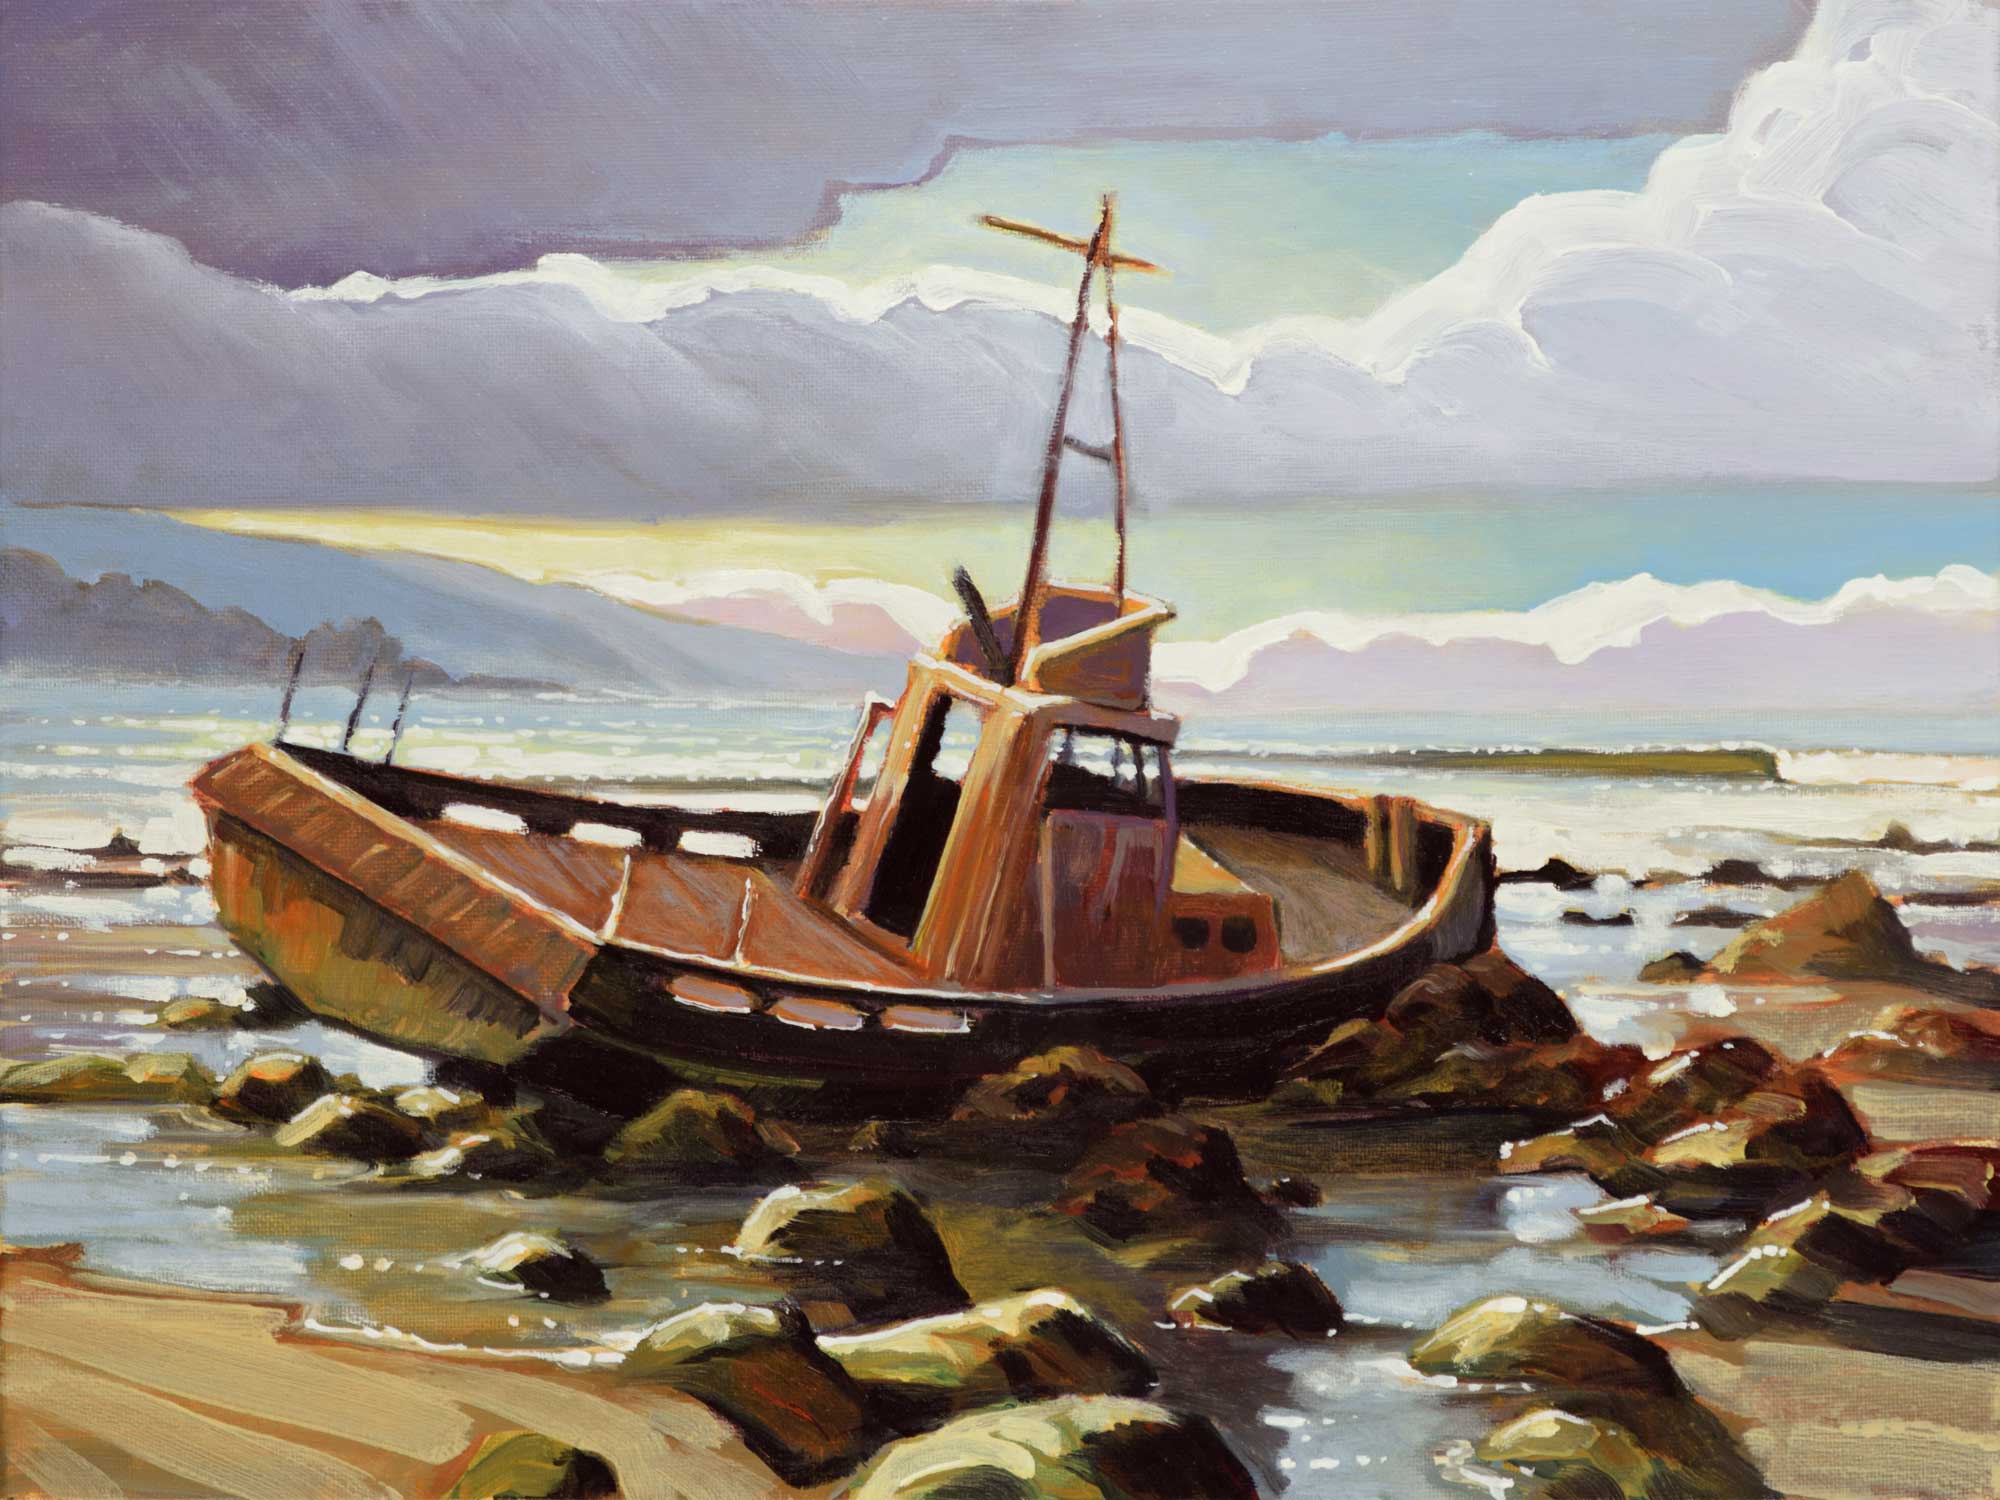 Plein air painting of a shiprwreck near Cayucos on the San Luis Obispo County coast of central California